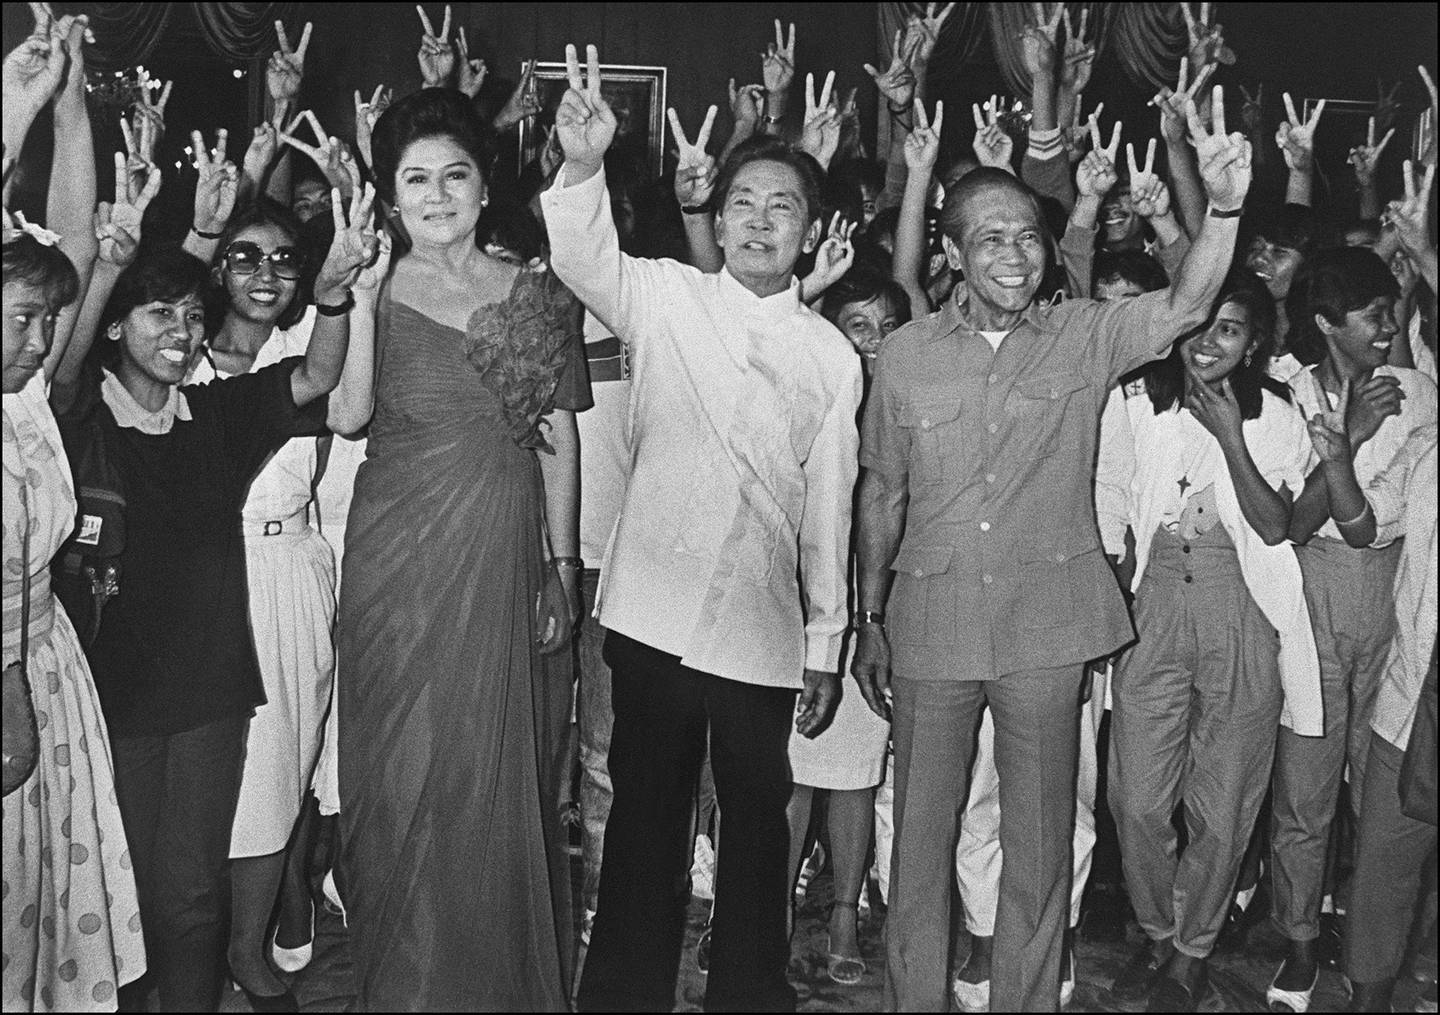 Surrounded by supporters, Philippines President Ferdinand Marcos (C), his wife Imelda and his Vice President Arturo Tolentino make the "V" sign for victory of the presidential elections, 16 February 1986 in Manila at the Malacanang Palace. (Photo by HO / AFP)